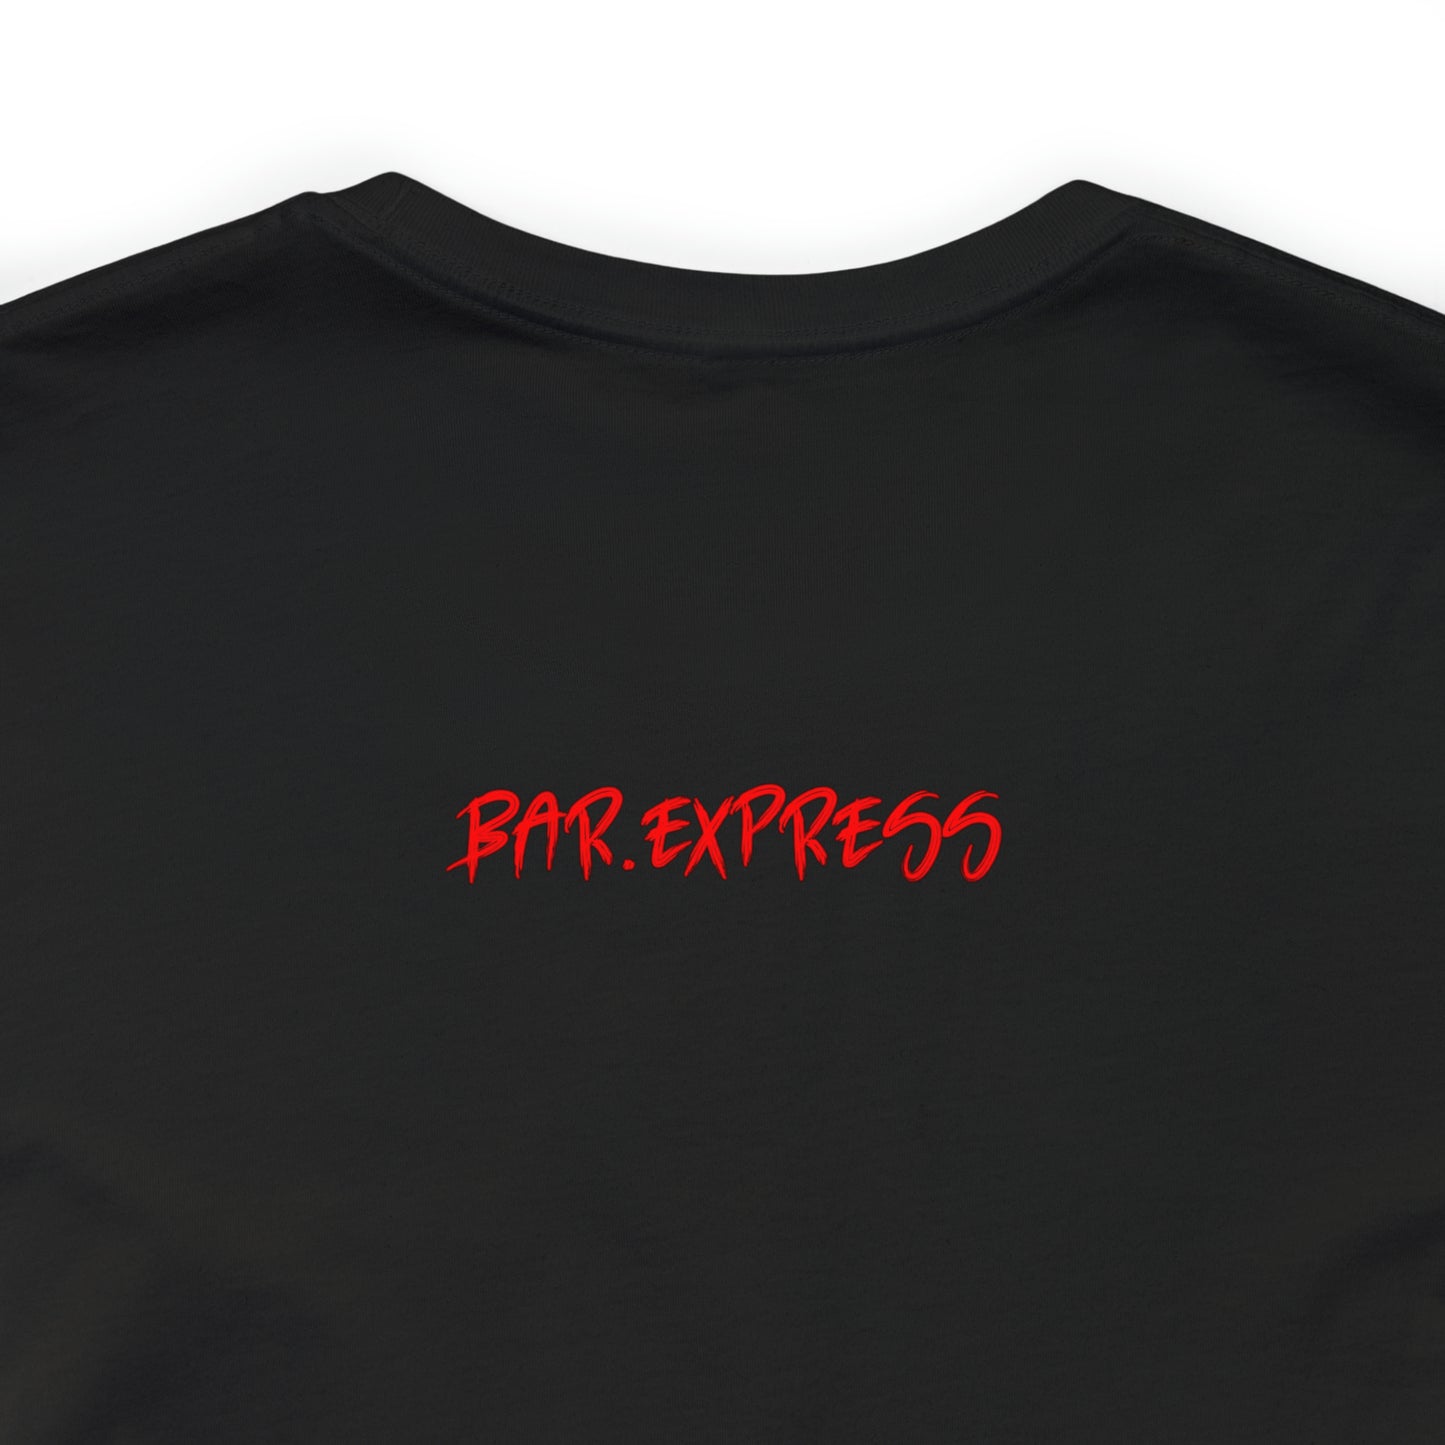 BarExpress NYC Rush Tee: In a NY Minute